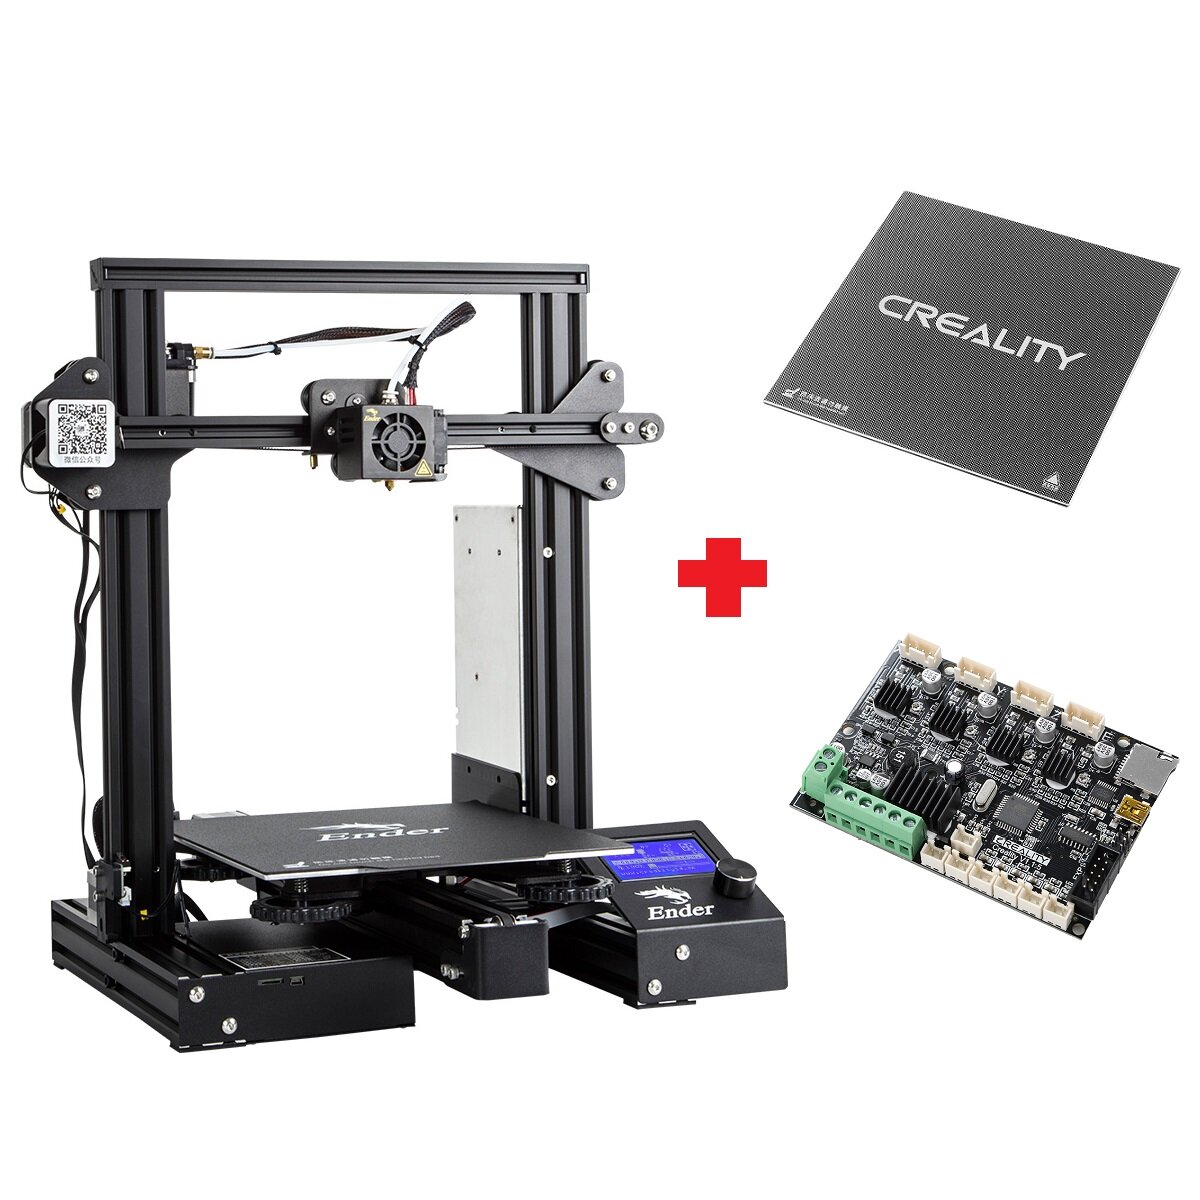 Creality 3D® Customized Version Ender-3Xs Pro 3D Printer 220x220x250mm Printing Size With Magnetic Removable Sticker/Glass Plate Platform/V1.1.5 Super Silent Mainboard